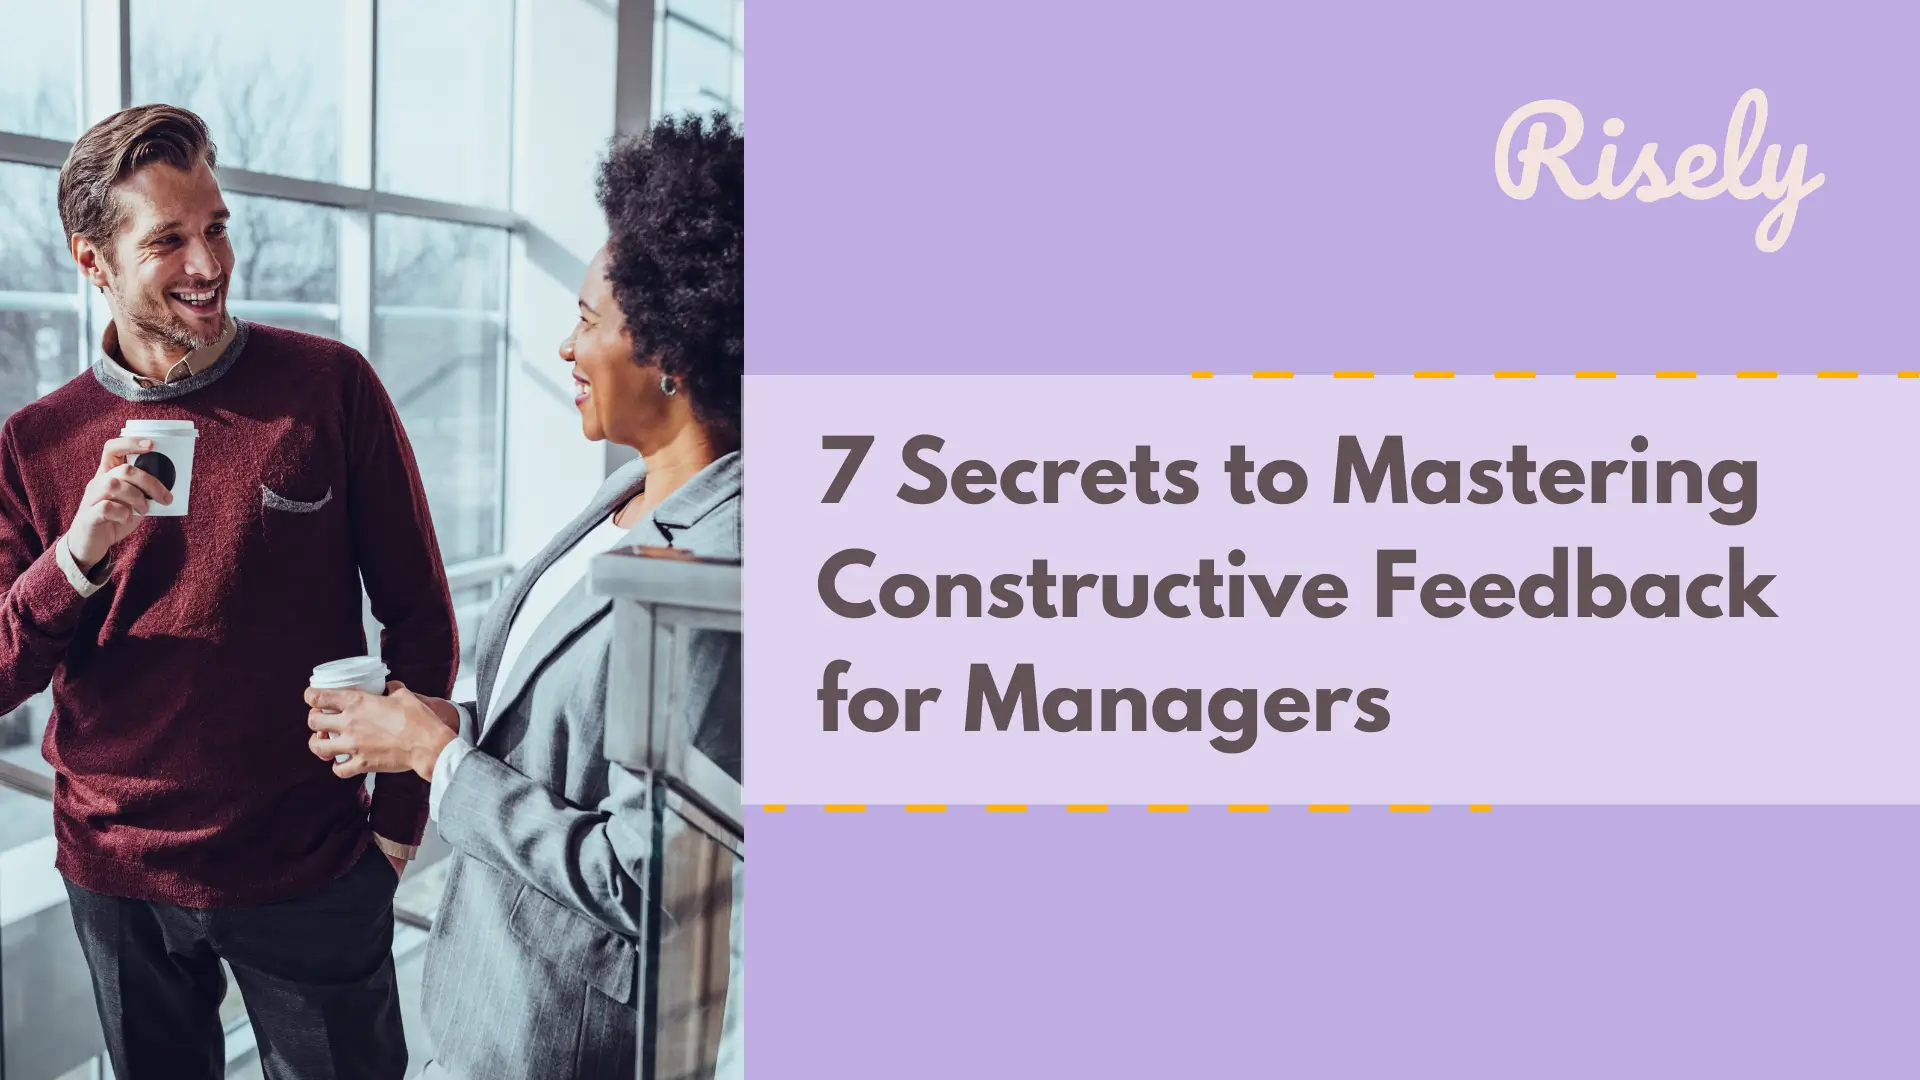 7 Secrets to Mastering Constructive Feedback for Managers